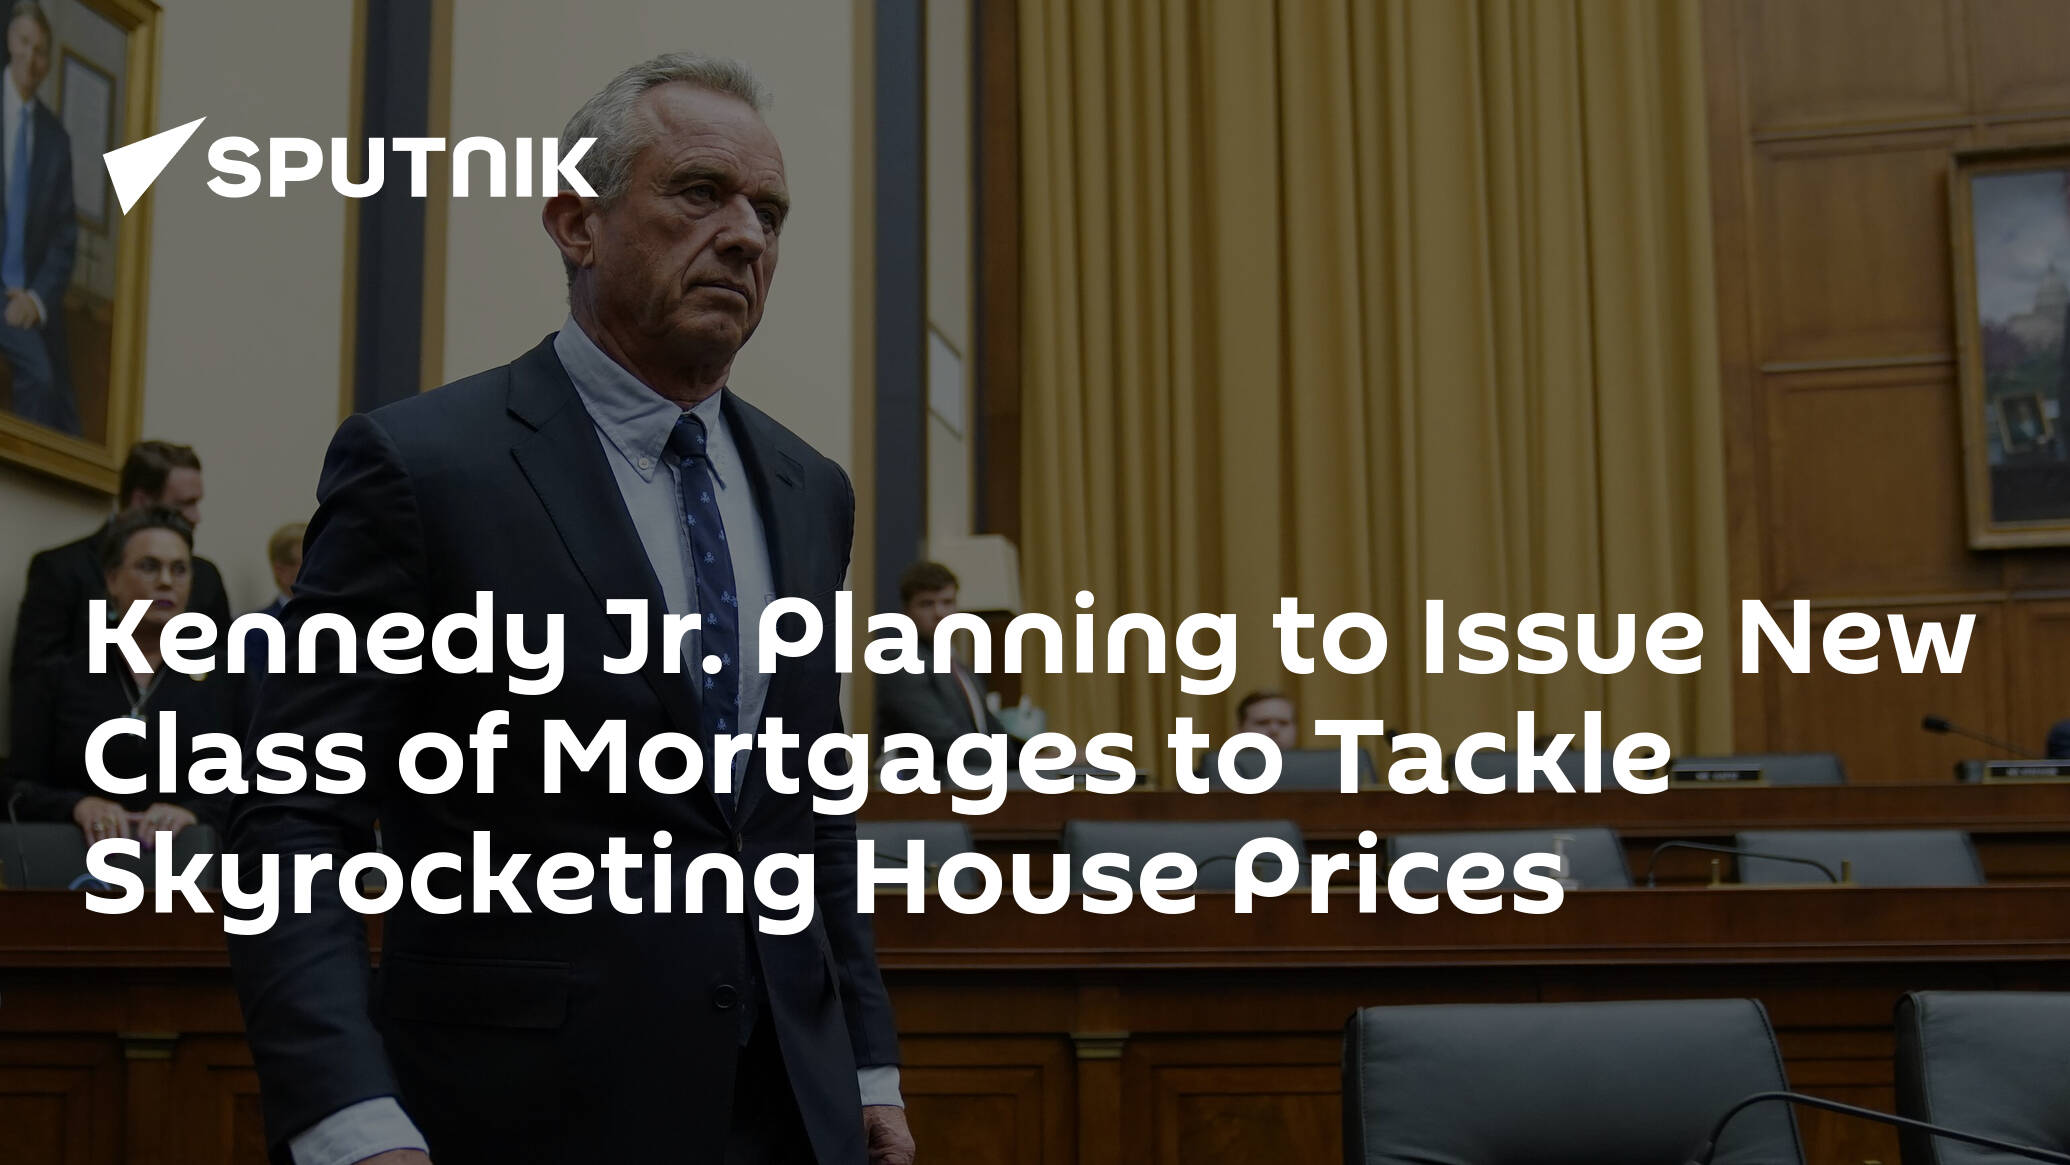 Kennedy Jr. Planning to Issue New Class of Mortgages to Tackle Skyrocketing House Prices